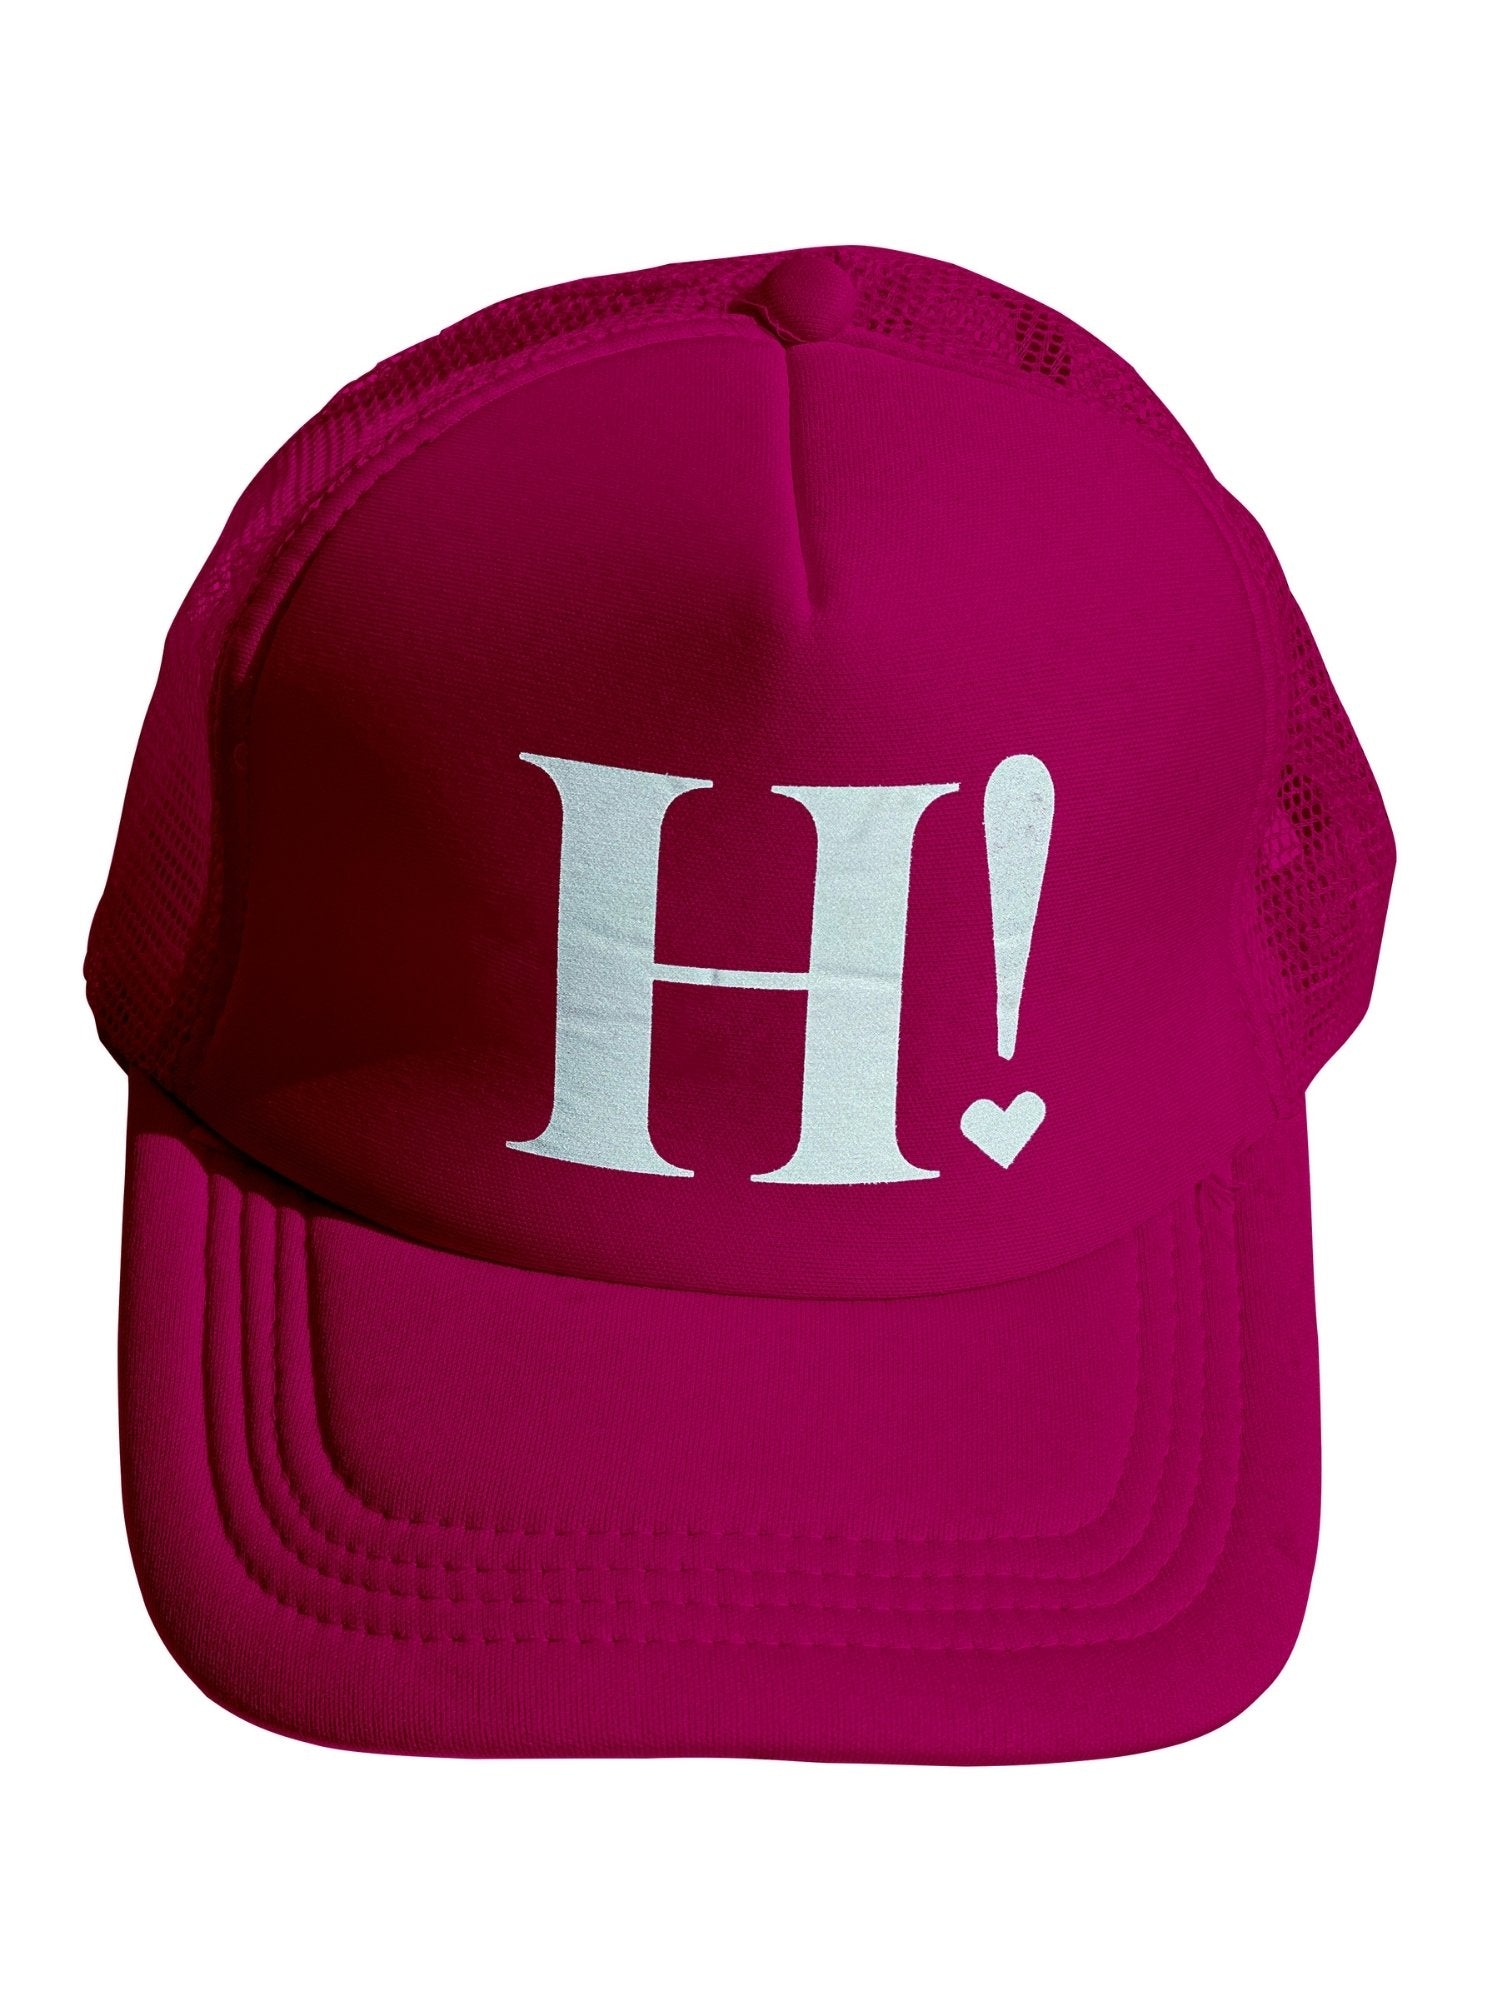 Hat - Paradise Pink with Silver H!